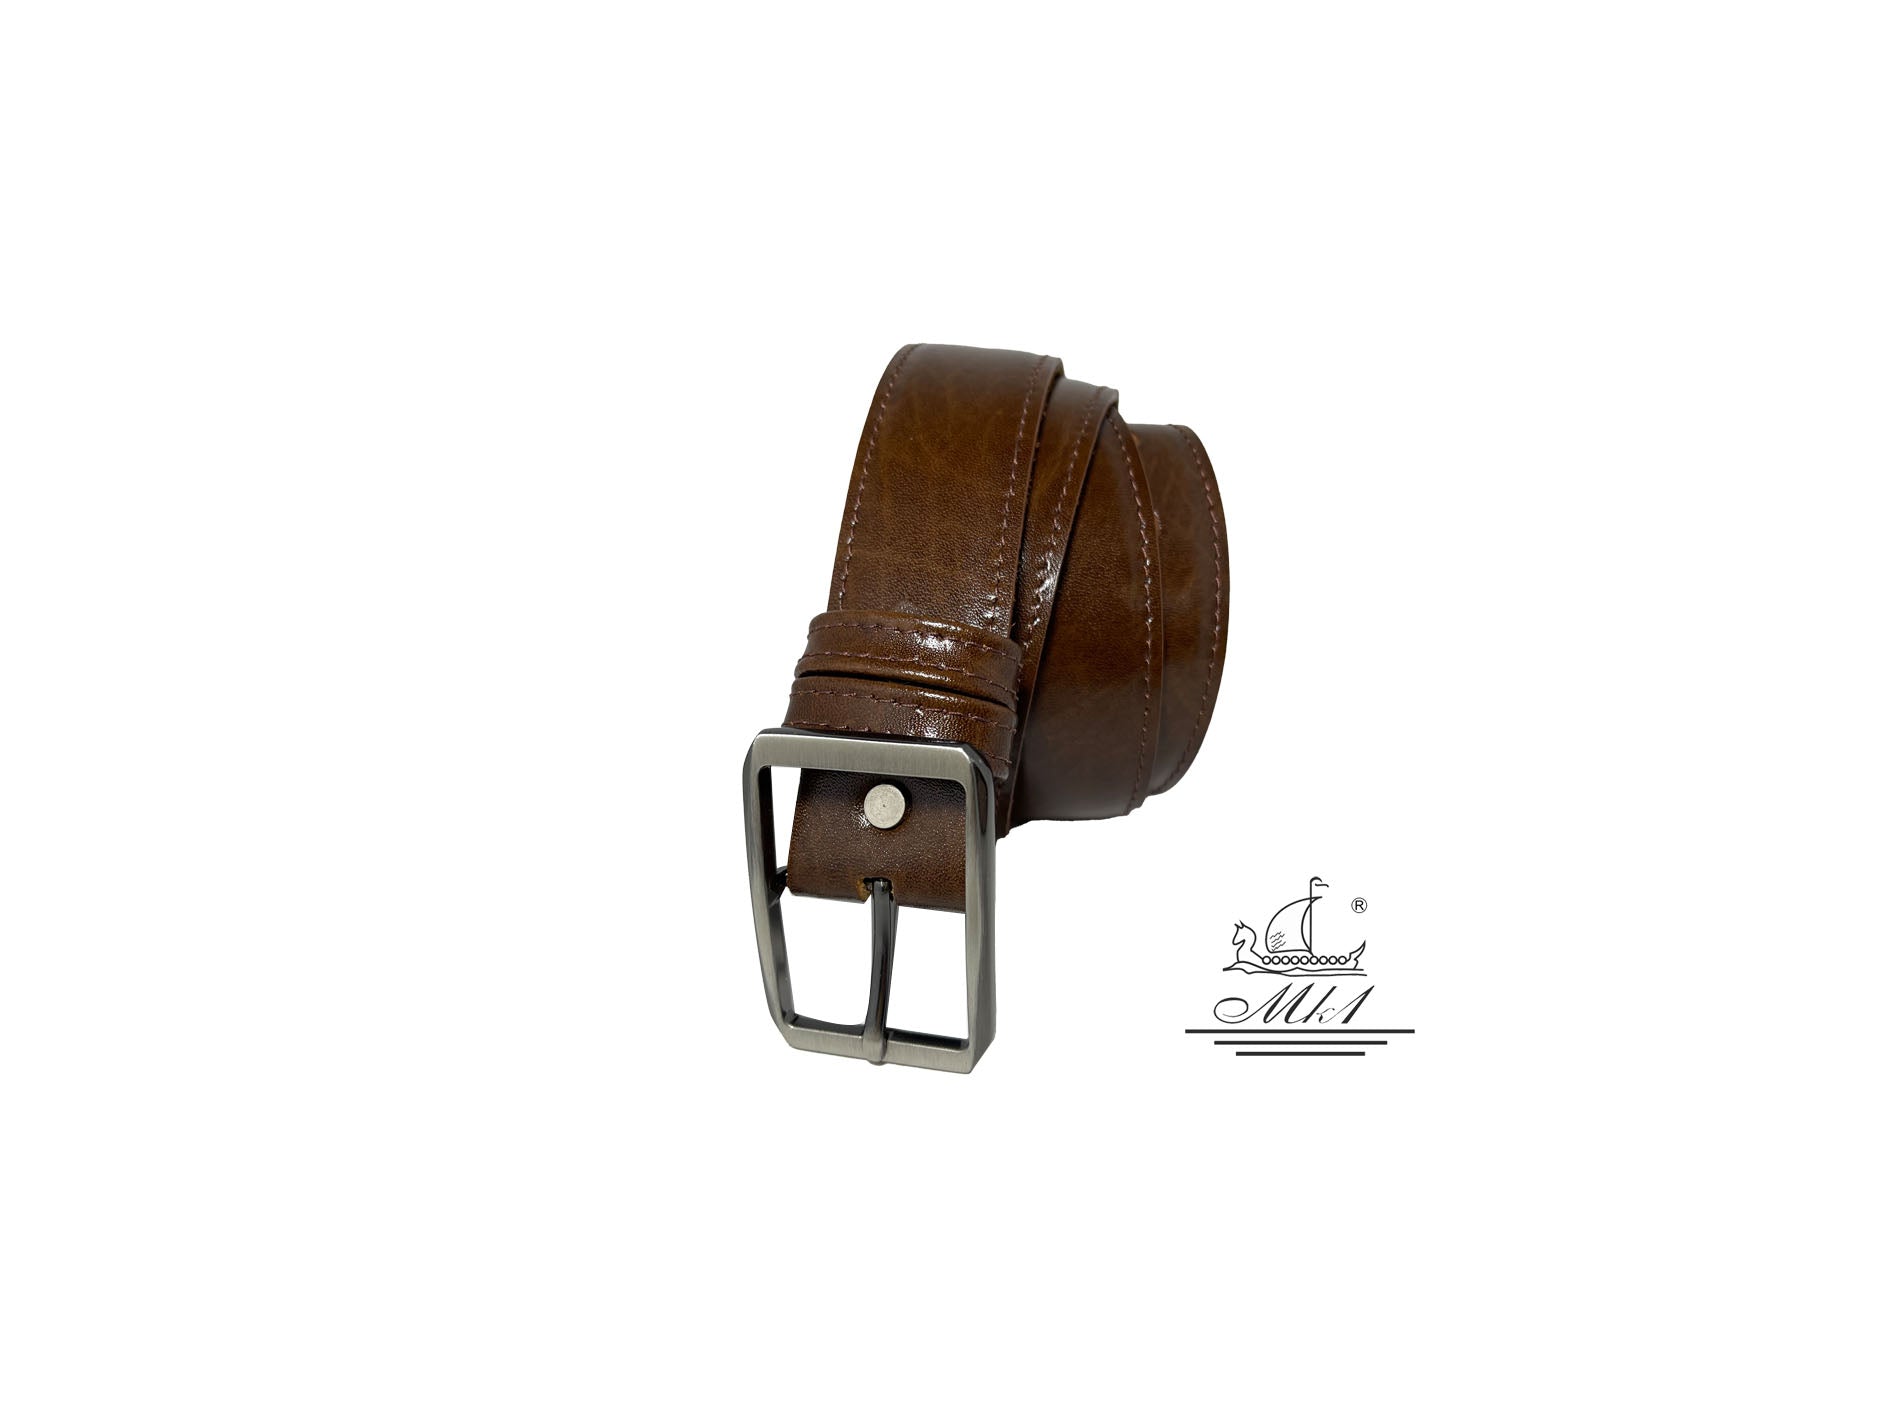 Unisex 3,5cm wide belt handcrafted from brown leather with sticking design. A001/35BR/DG